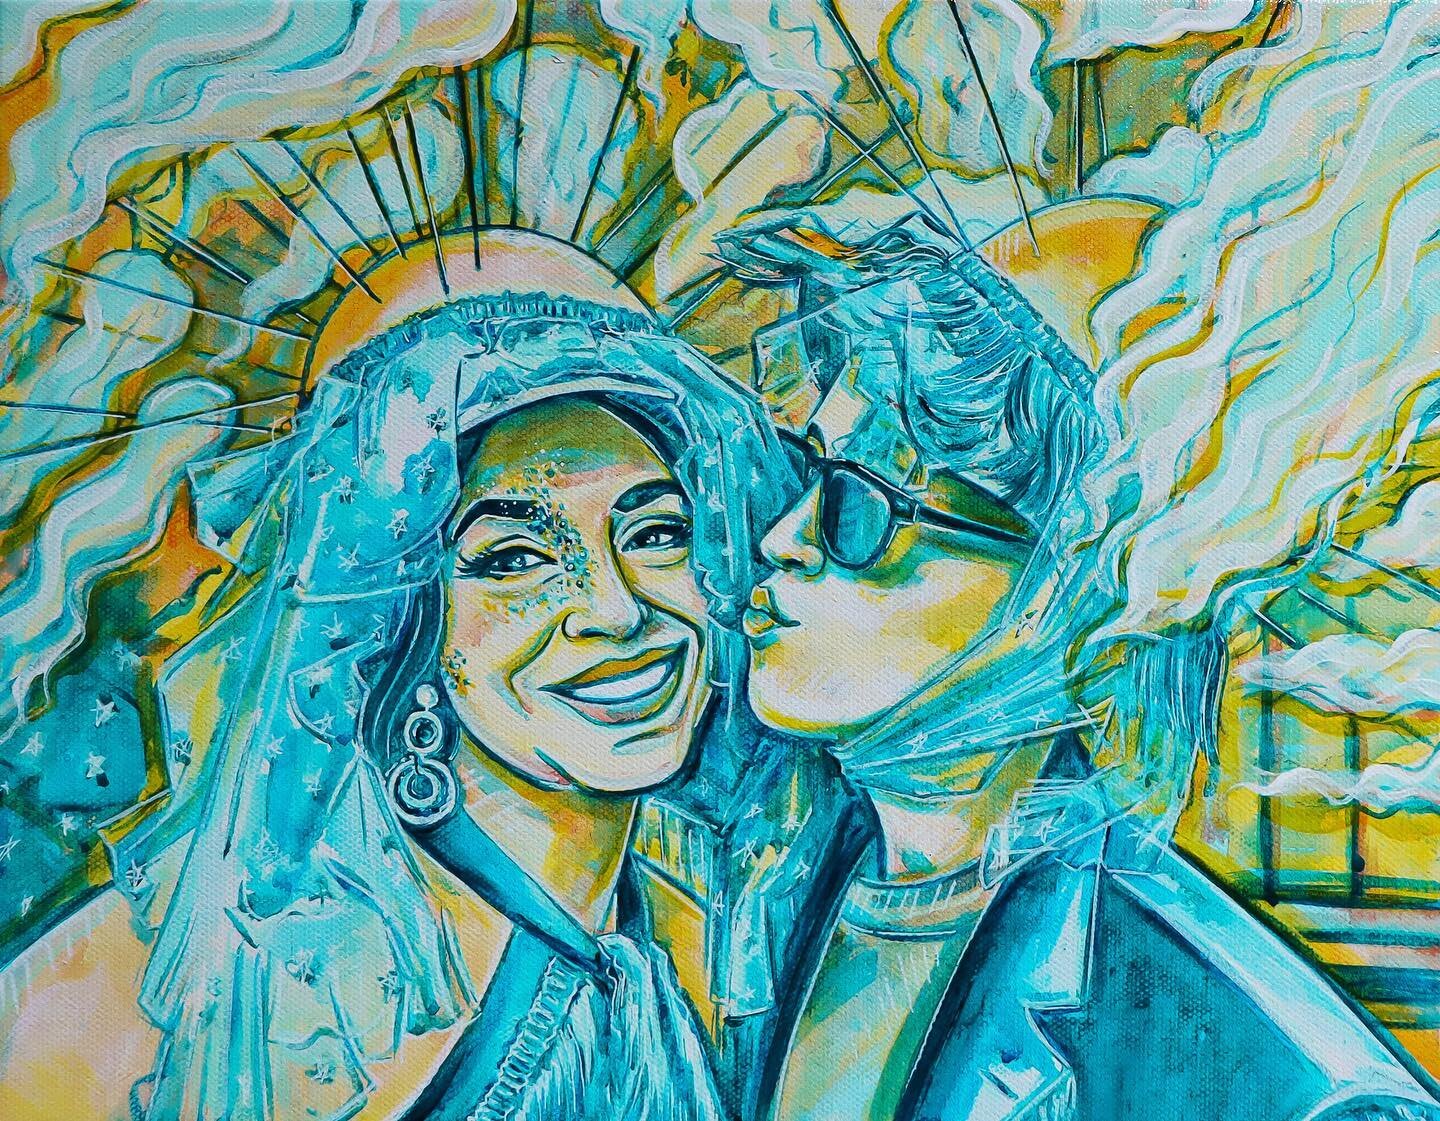 Hiiiiii, I forgot to both show off and photograph a chunk of my Mardi Gras painting commissions from this year.
Woops.
BUT I REMEMBERED TO PHOTOGRAPH THIS ONE.
My two favorites.. love AND carnival. Shooo. 
Happy flipping Wednesday✨
&mdash;
&mdash;
#m